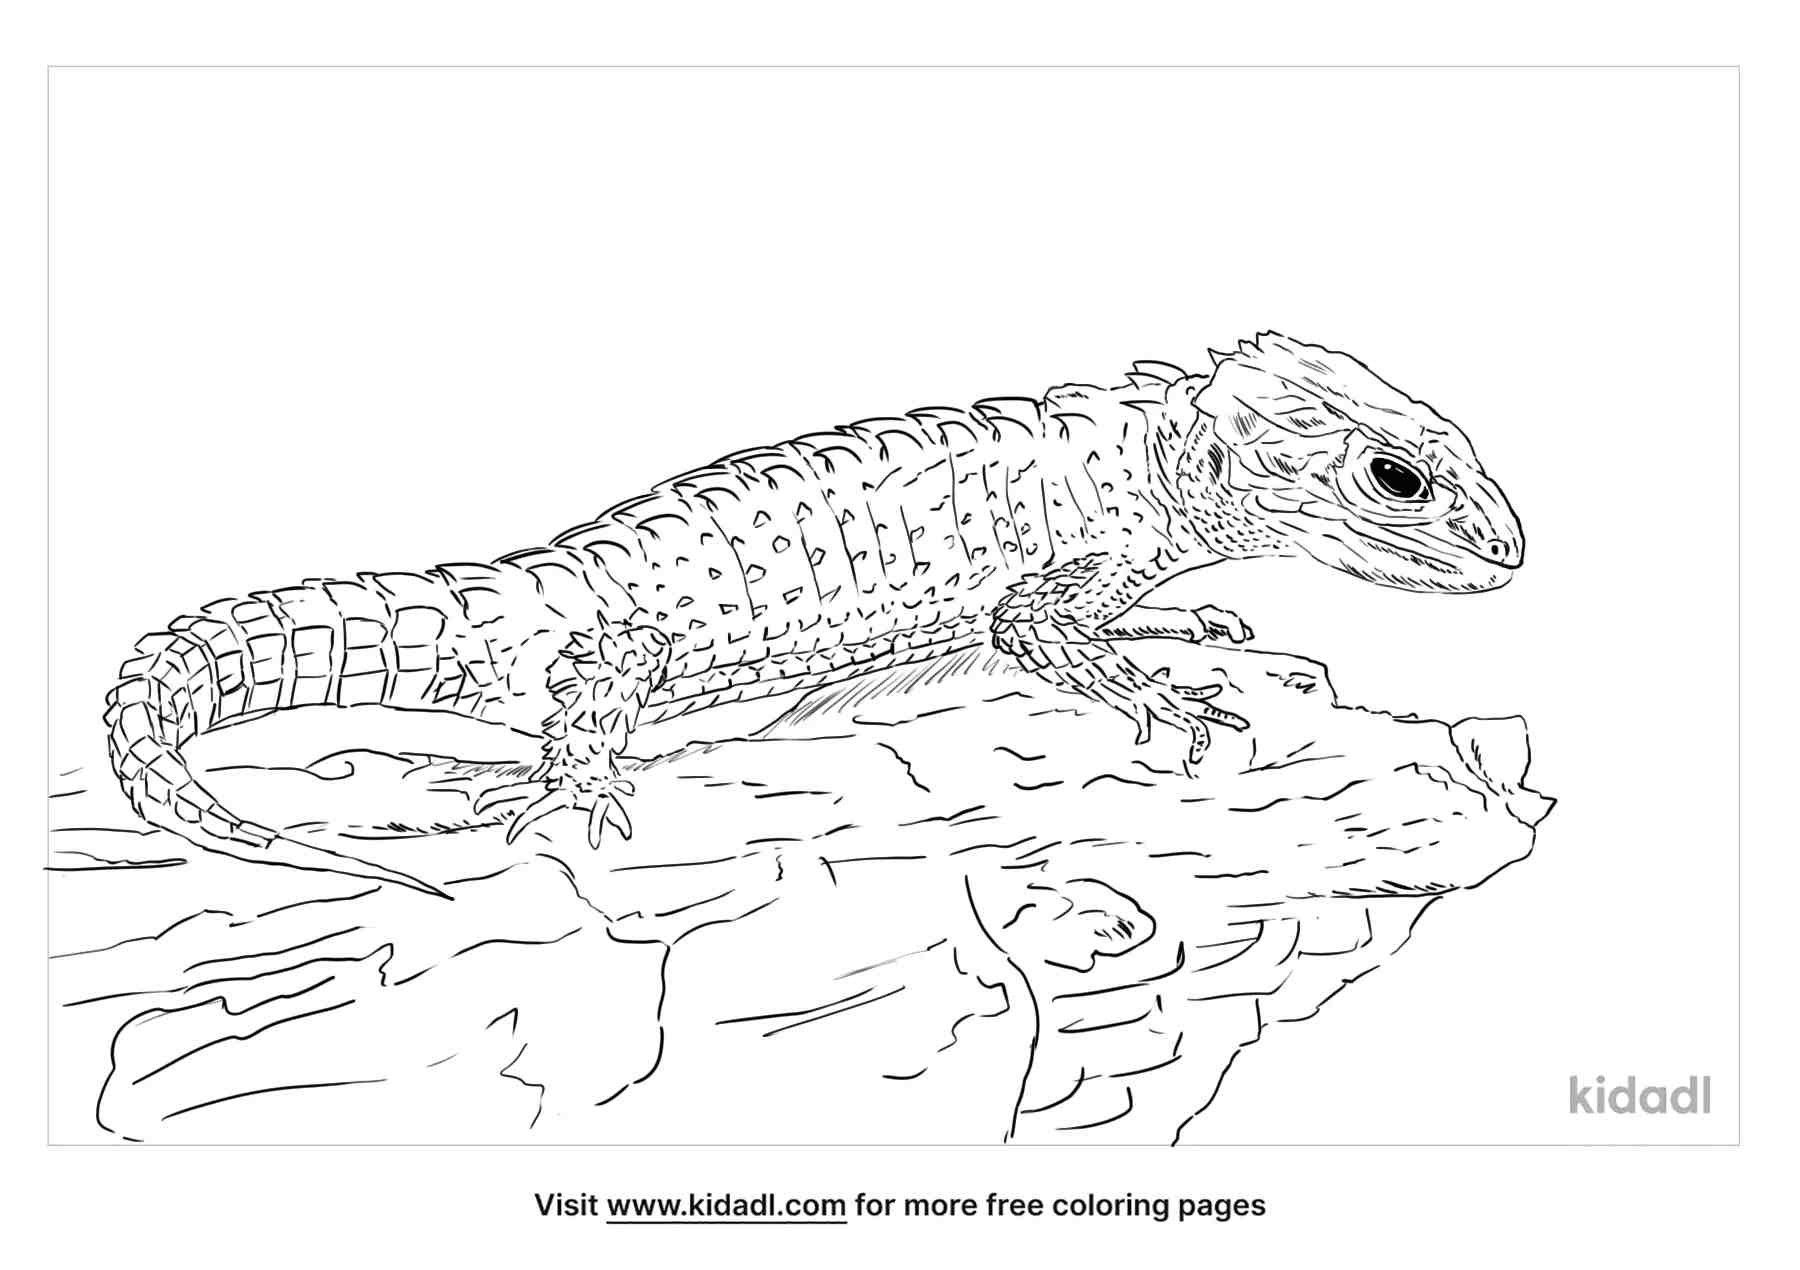 Crocodile Skink coloring pages for kids.